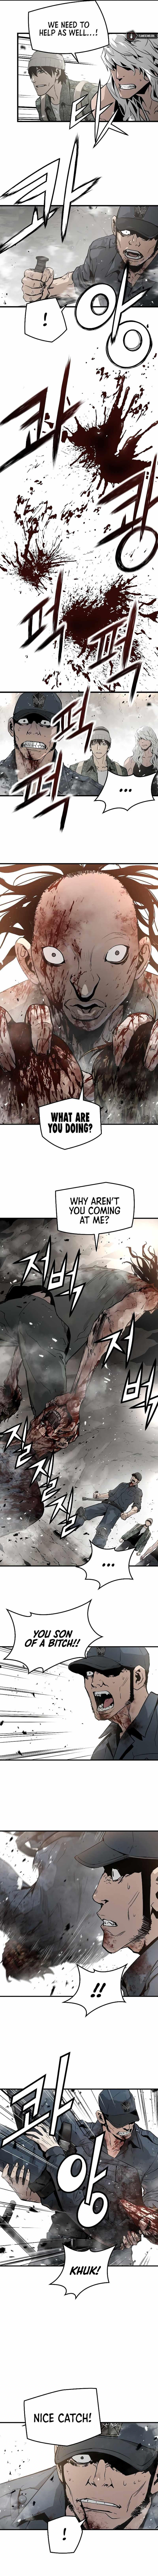 The Breaker: Eternal Force Chapter 43 page 8 - 